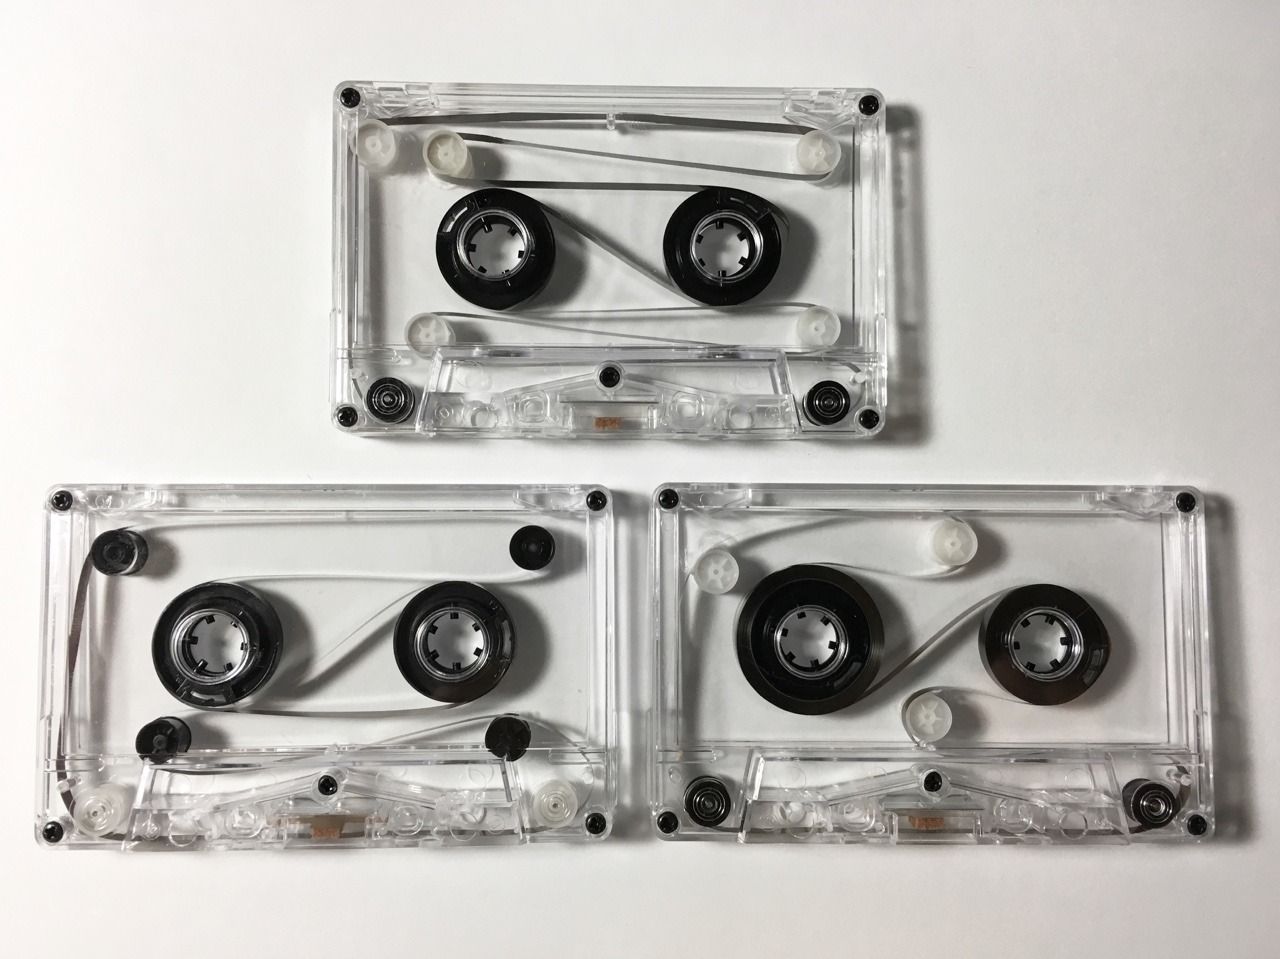 Just finished some of the weirdest/longest tape loops I have ever made! ✌️️